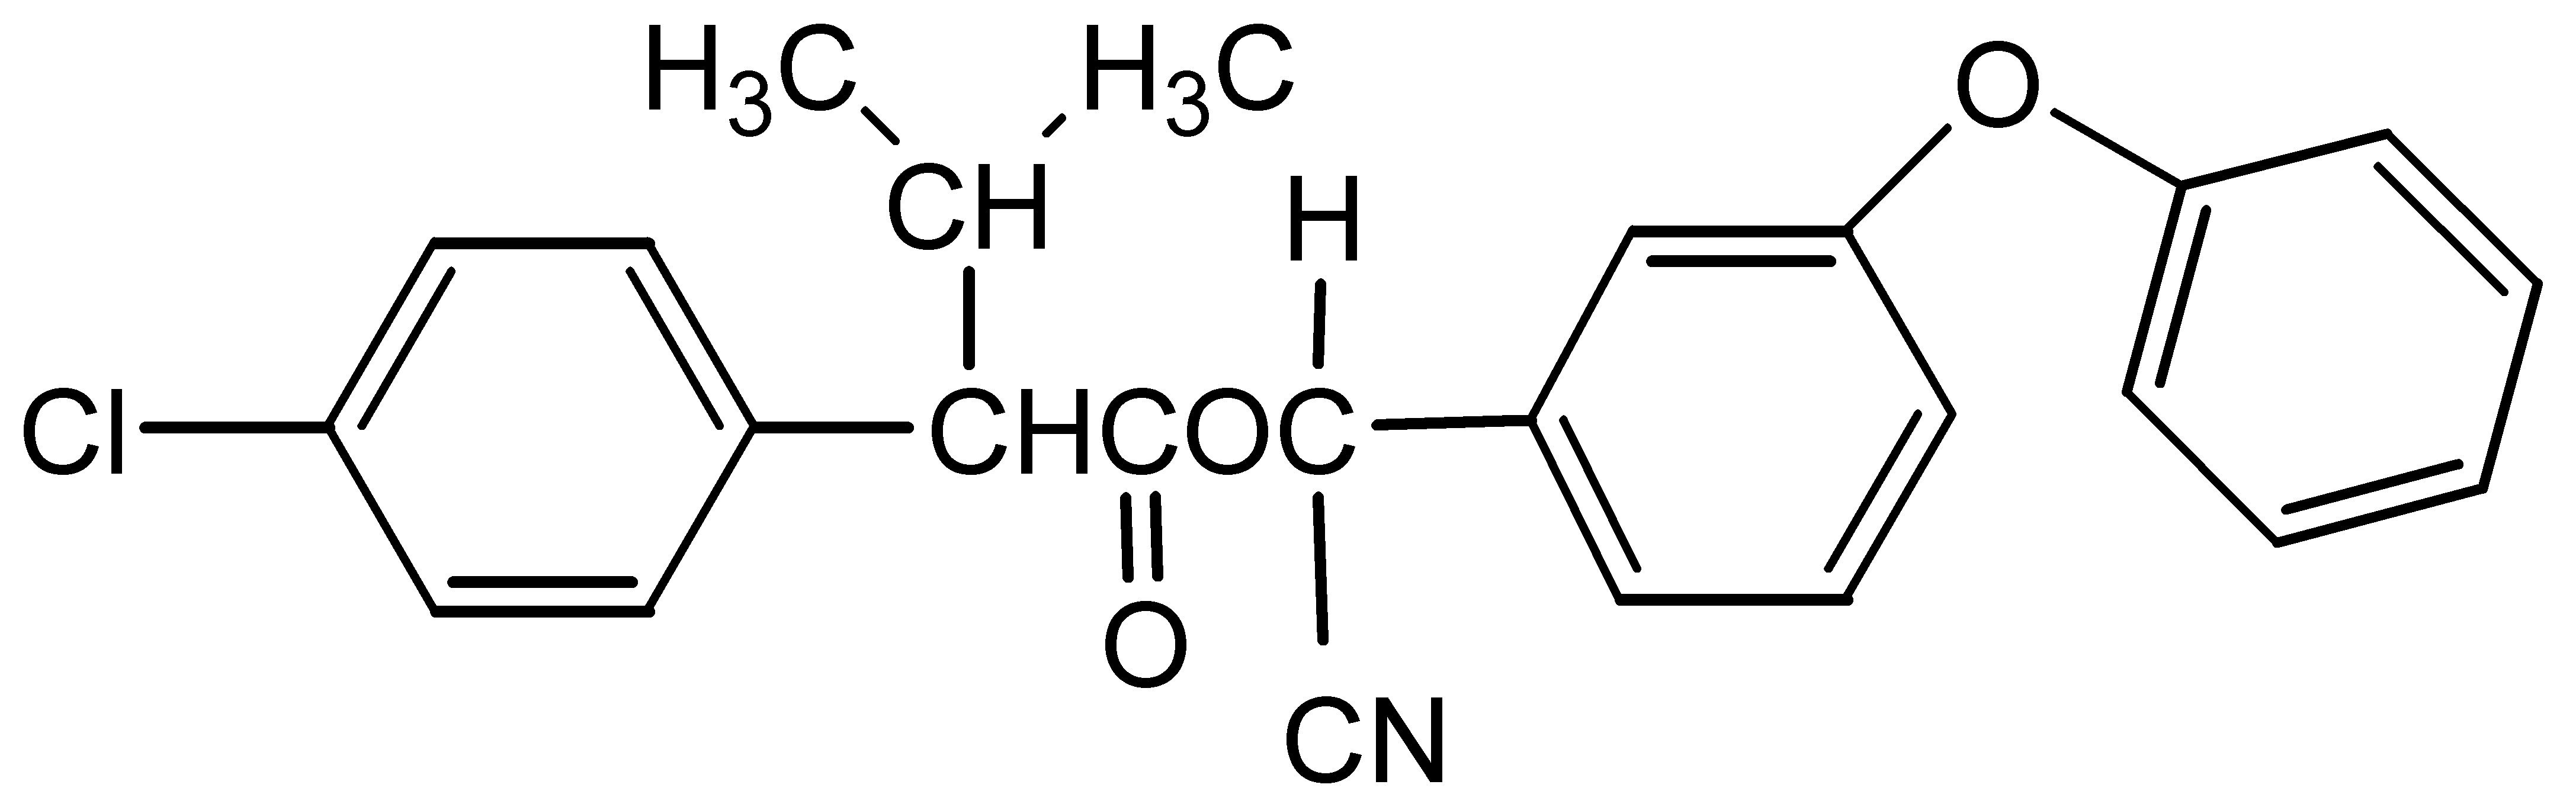 Chemical Structure for Fenvalerate